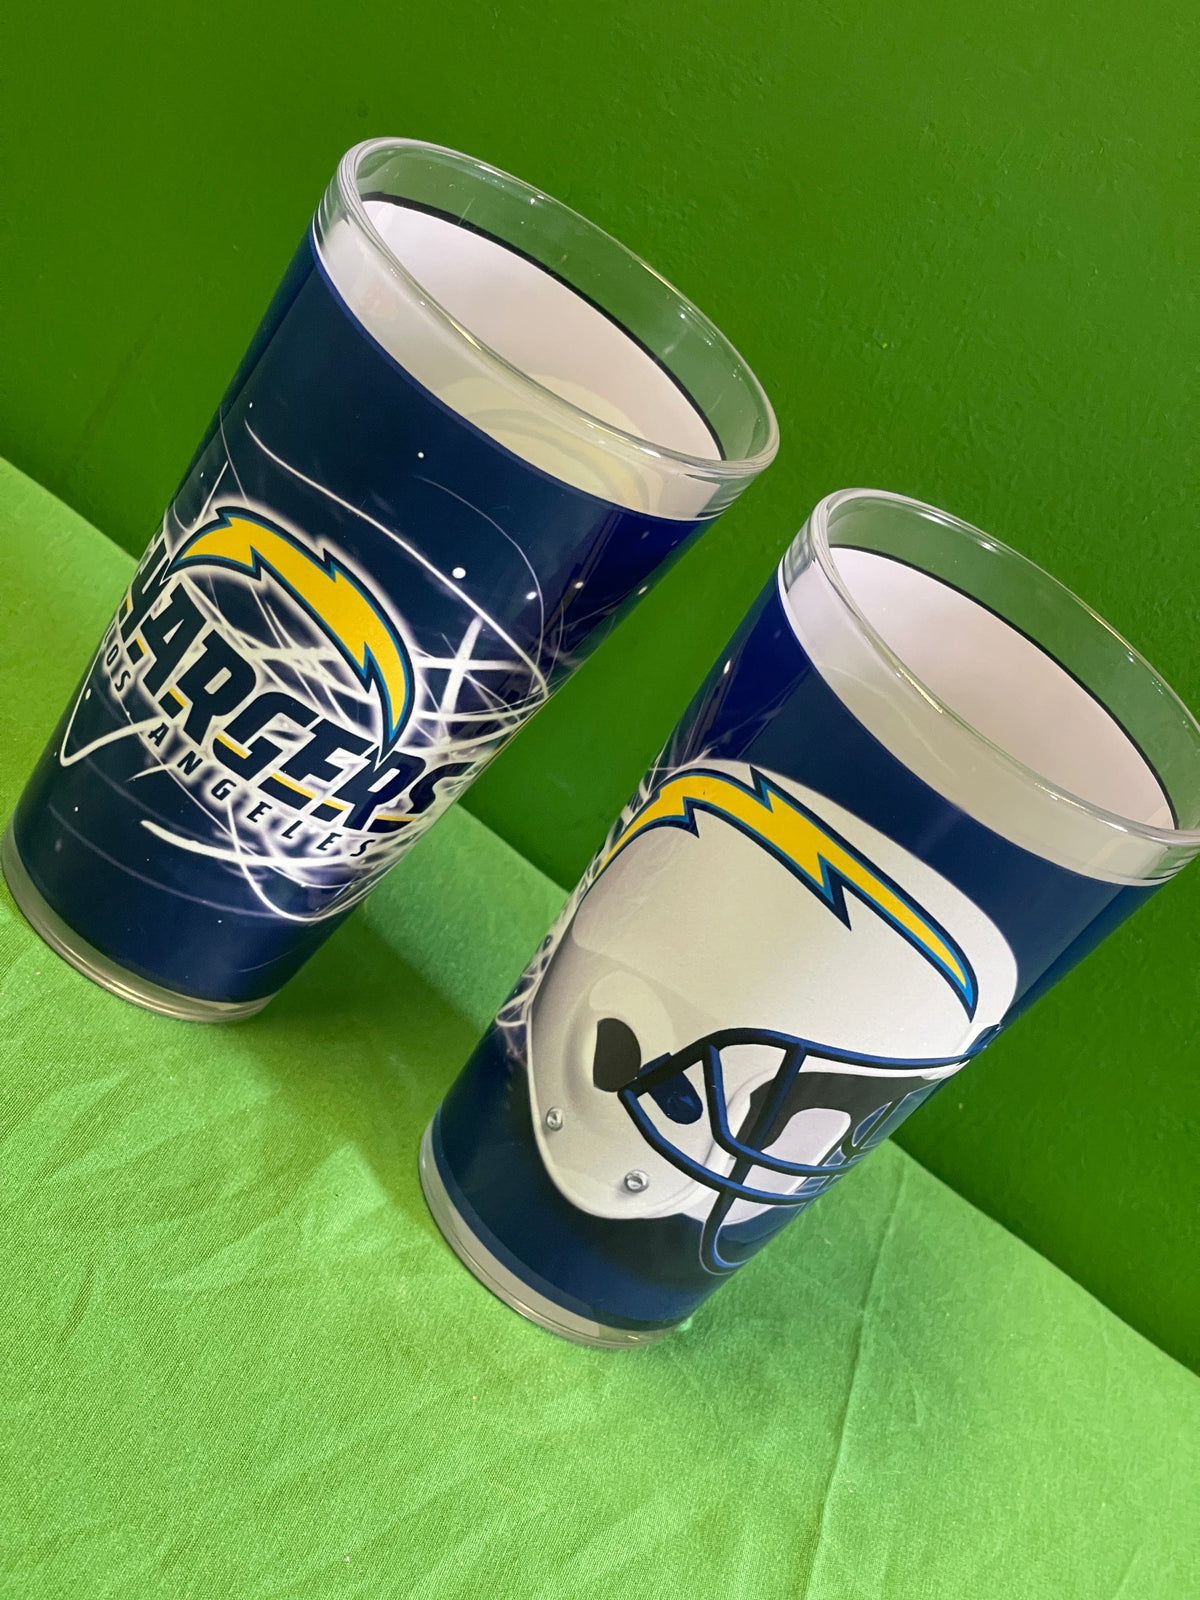 NFL Los Angeles Chargers Licensed Set of 2 16 oz Pint Glasses/Tumblers NWT